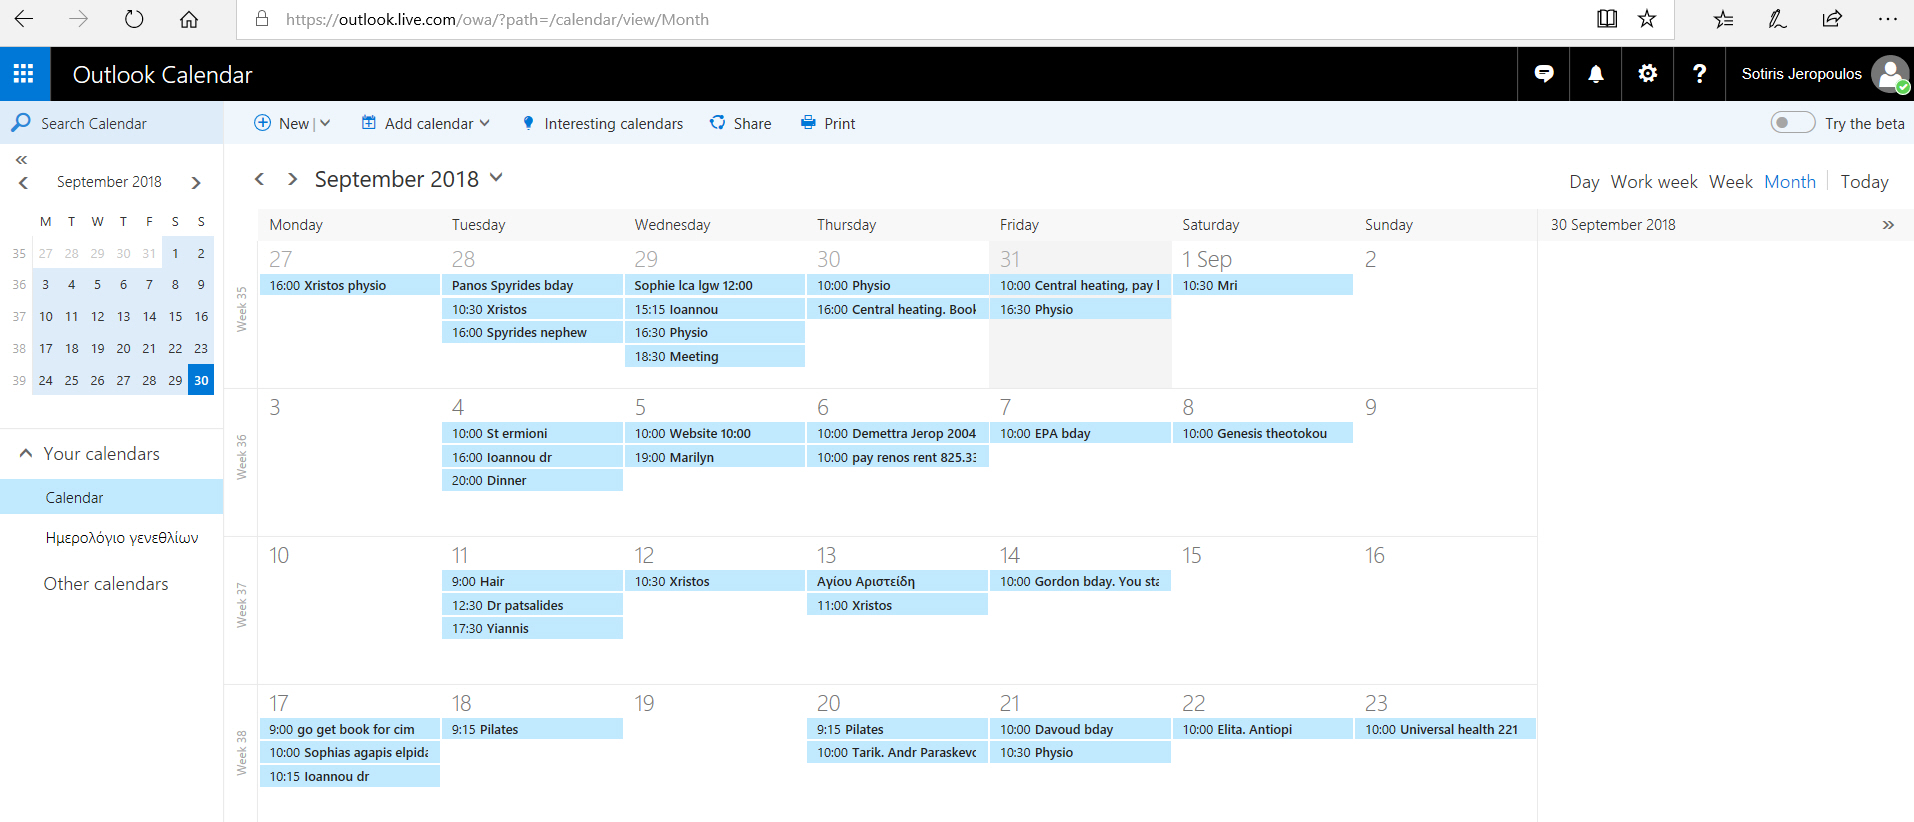 From Outlookcom Can I Export The Calendar Into A Csv File 6078